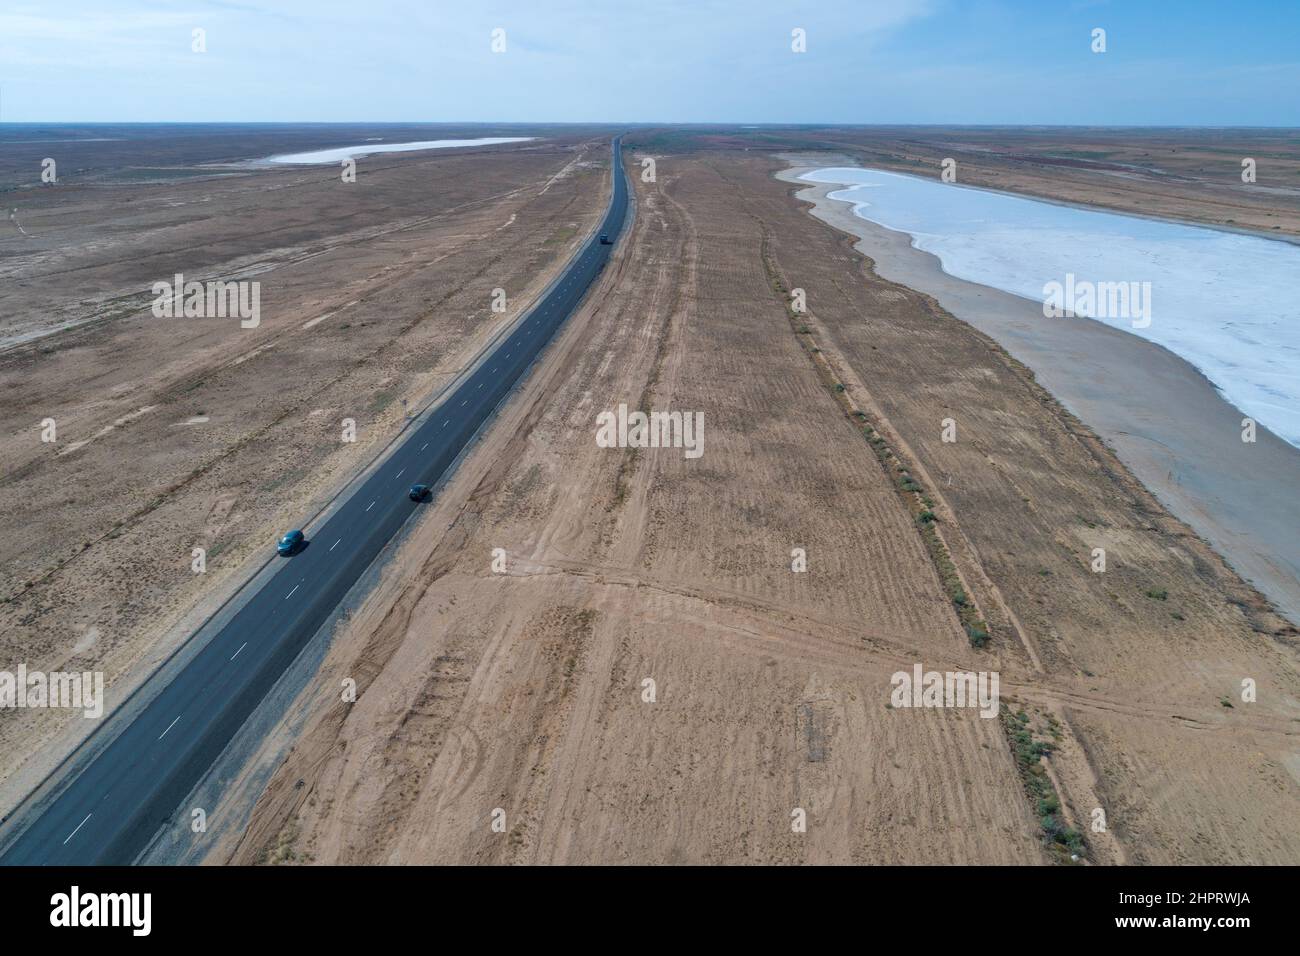 View from a height of the Elista - Astrakhan highway passing between salt lakes. Republic of Kalmykia, Russian Federation Stock Photo